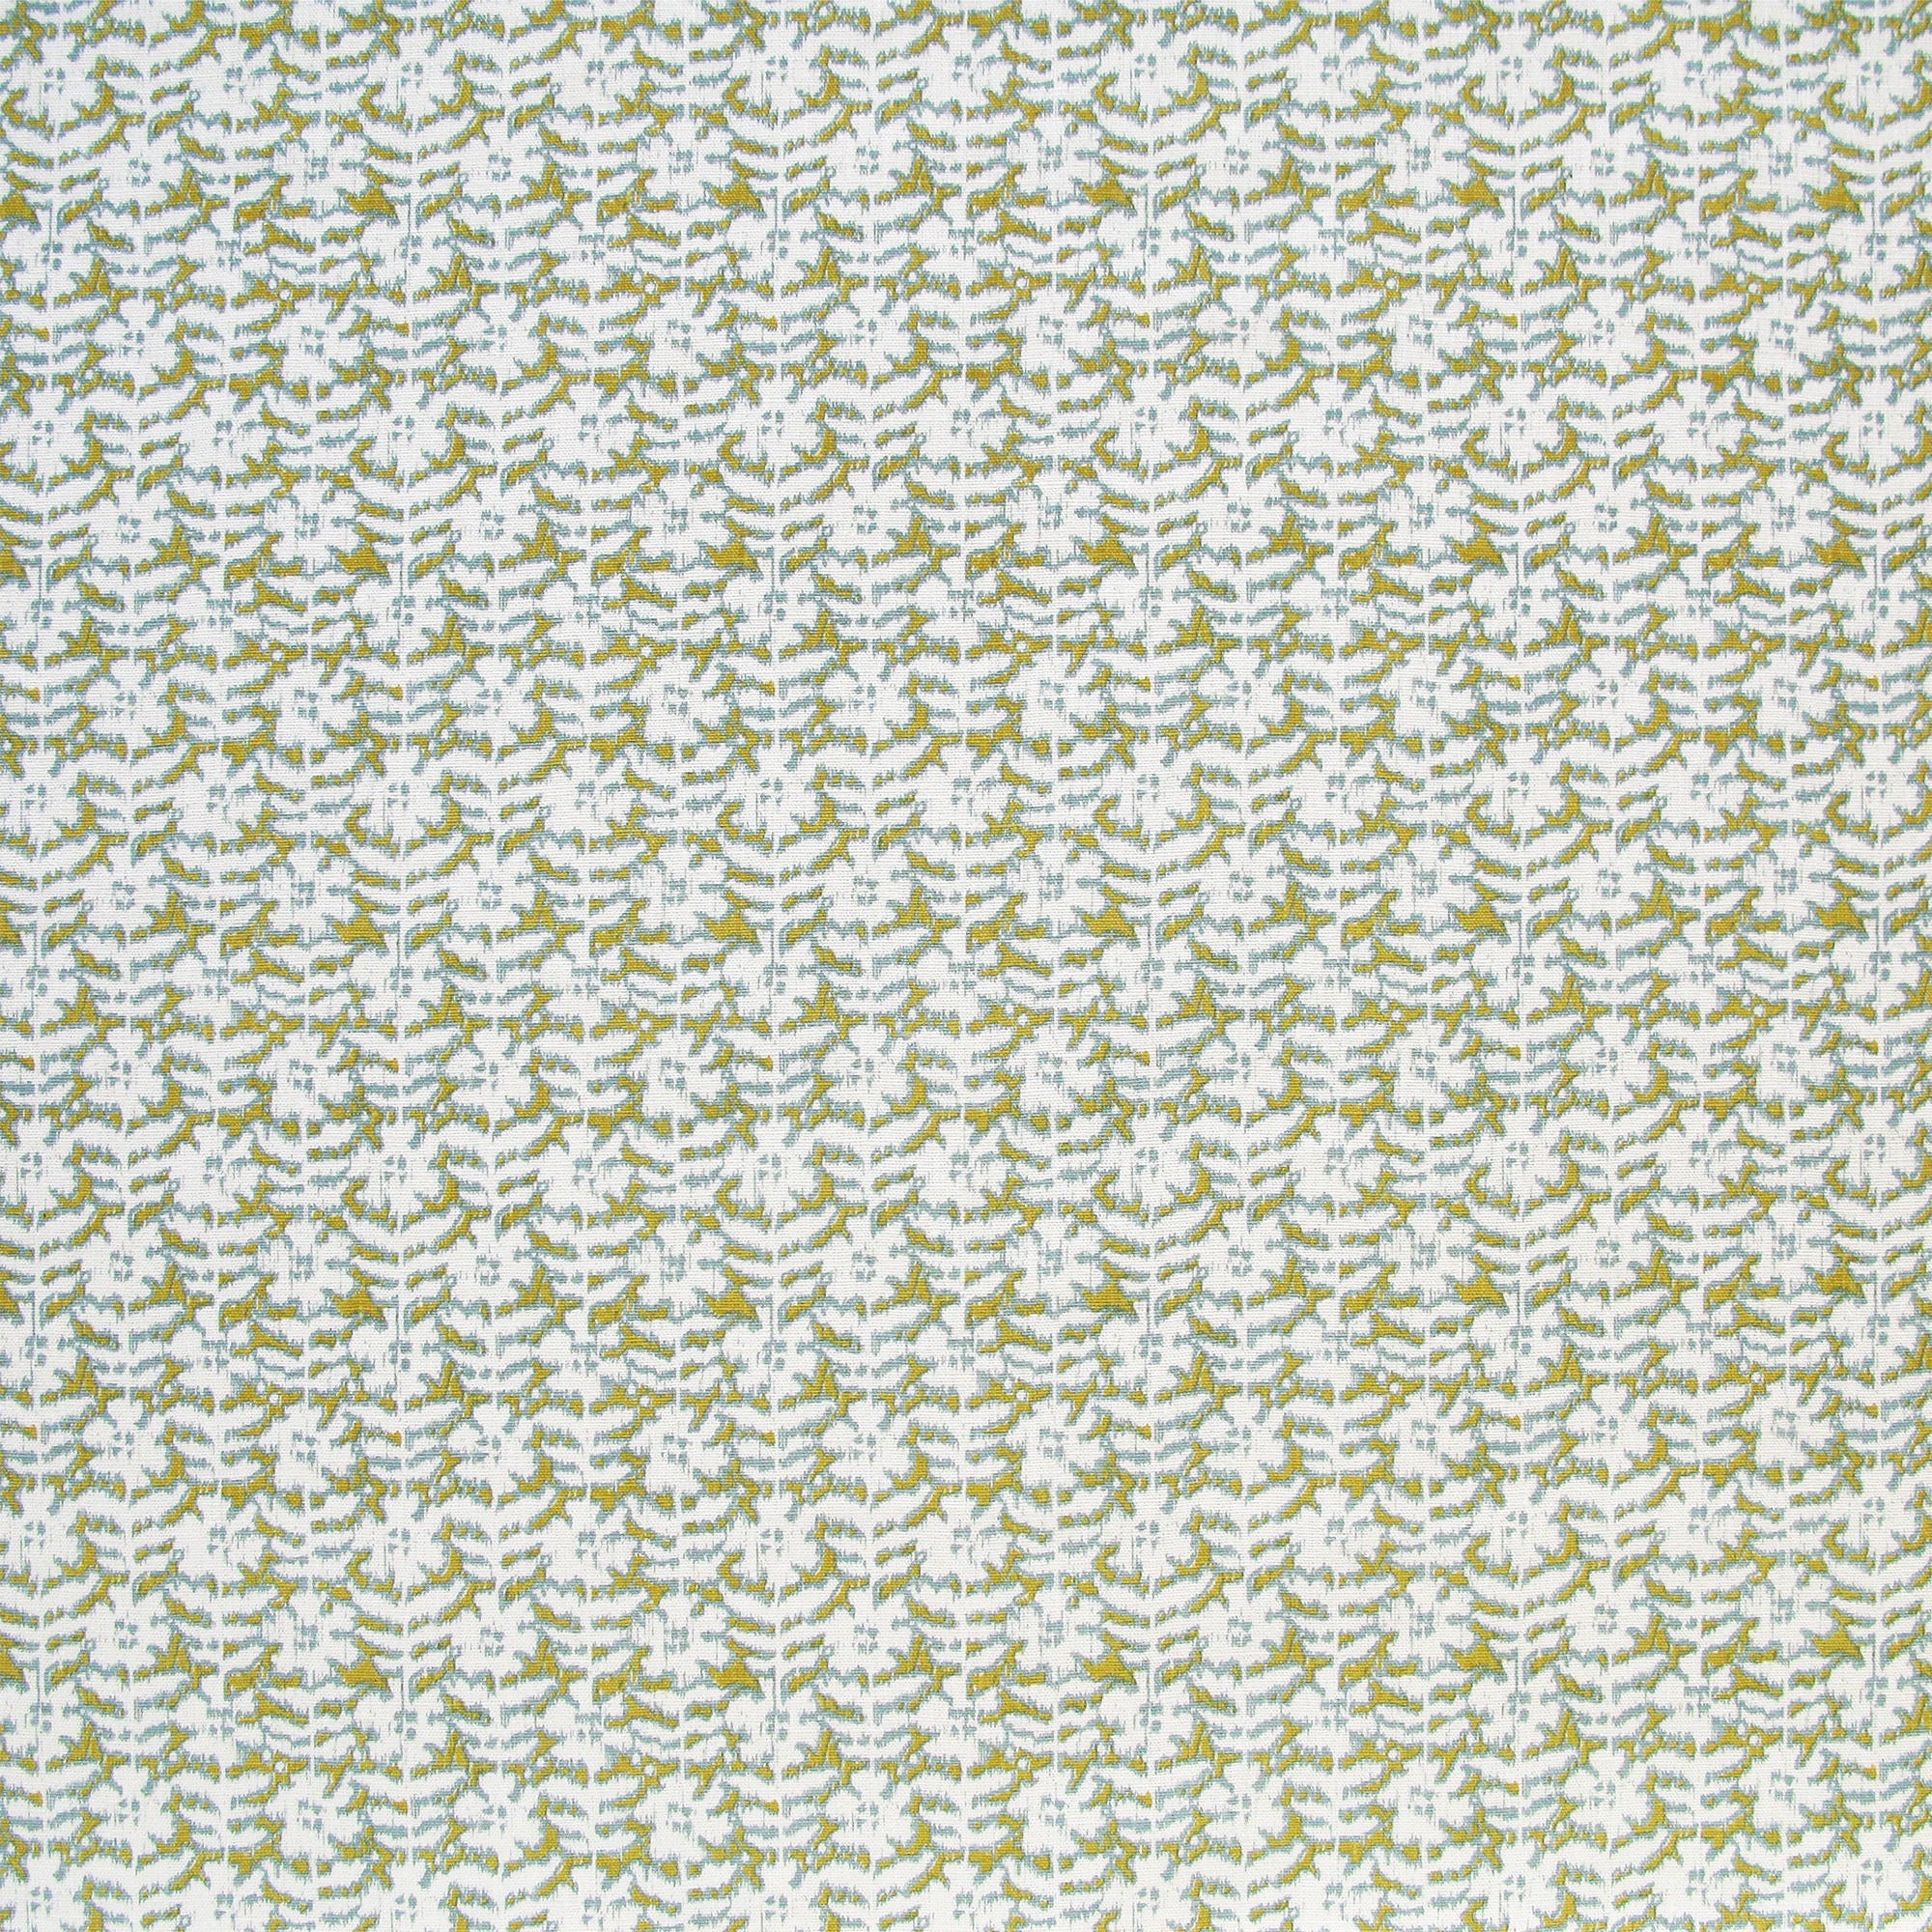 Detail of fabric in a floral grid print in white and blue on a mustard field.